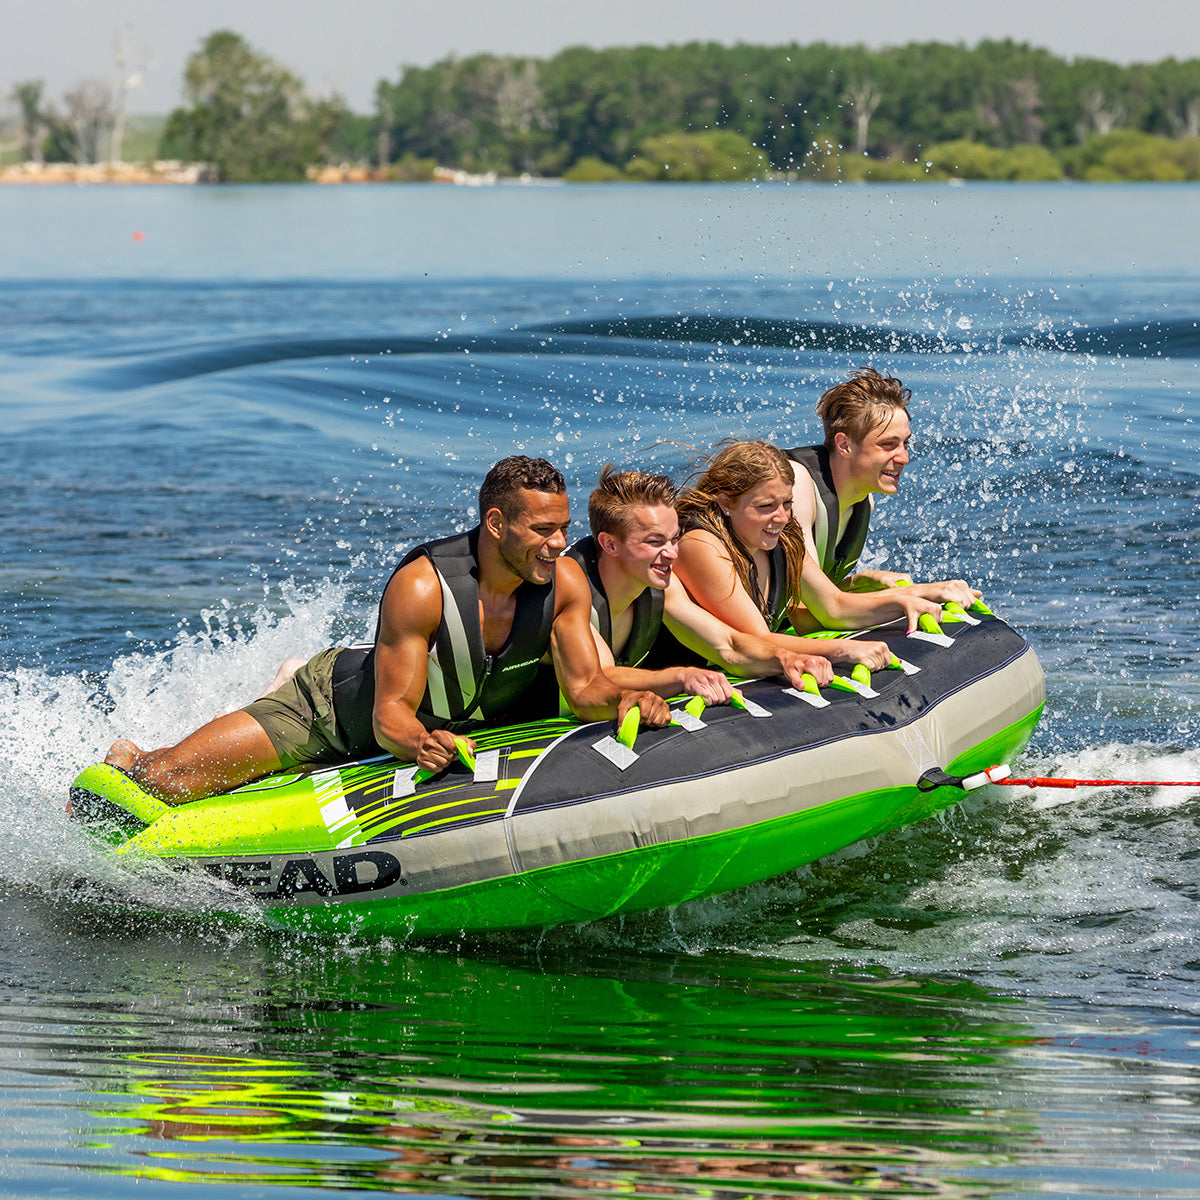 G-Force 1-4 Rider Towable Tube for Boating